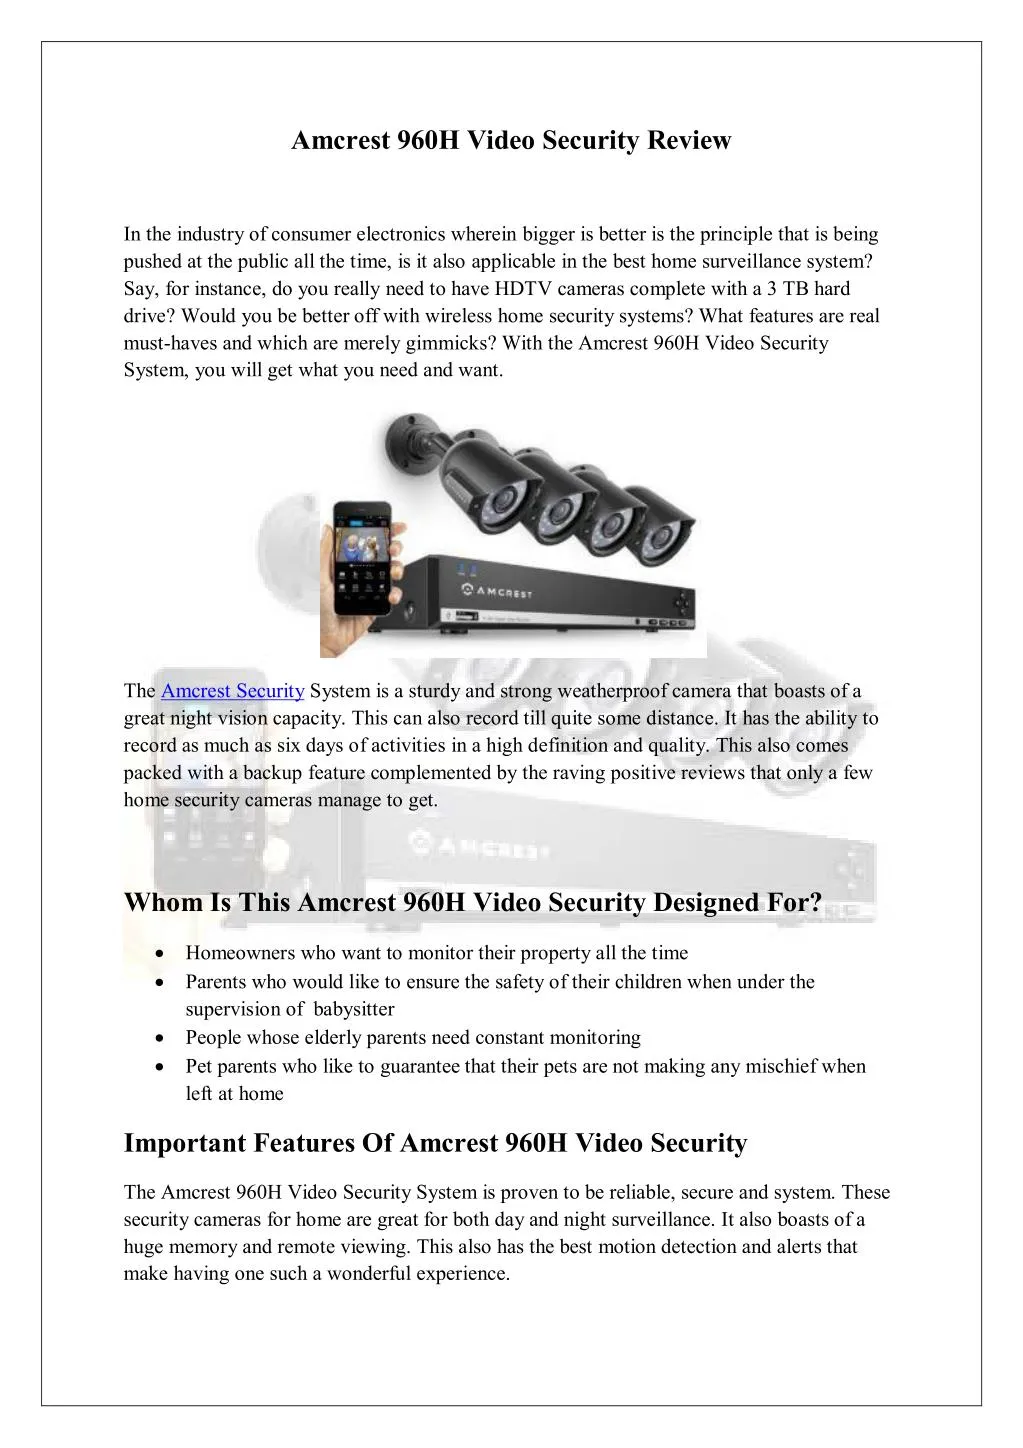 amcrest 960h video security review